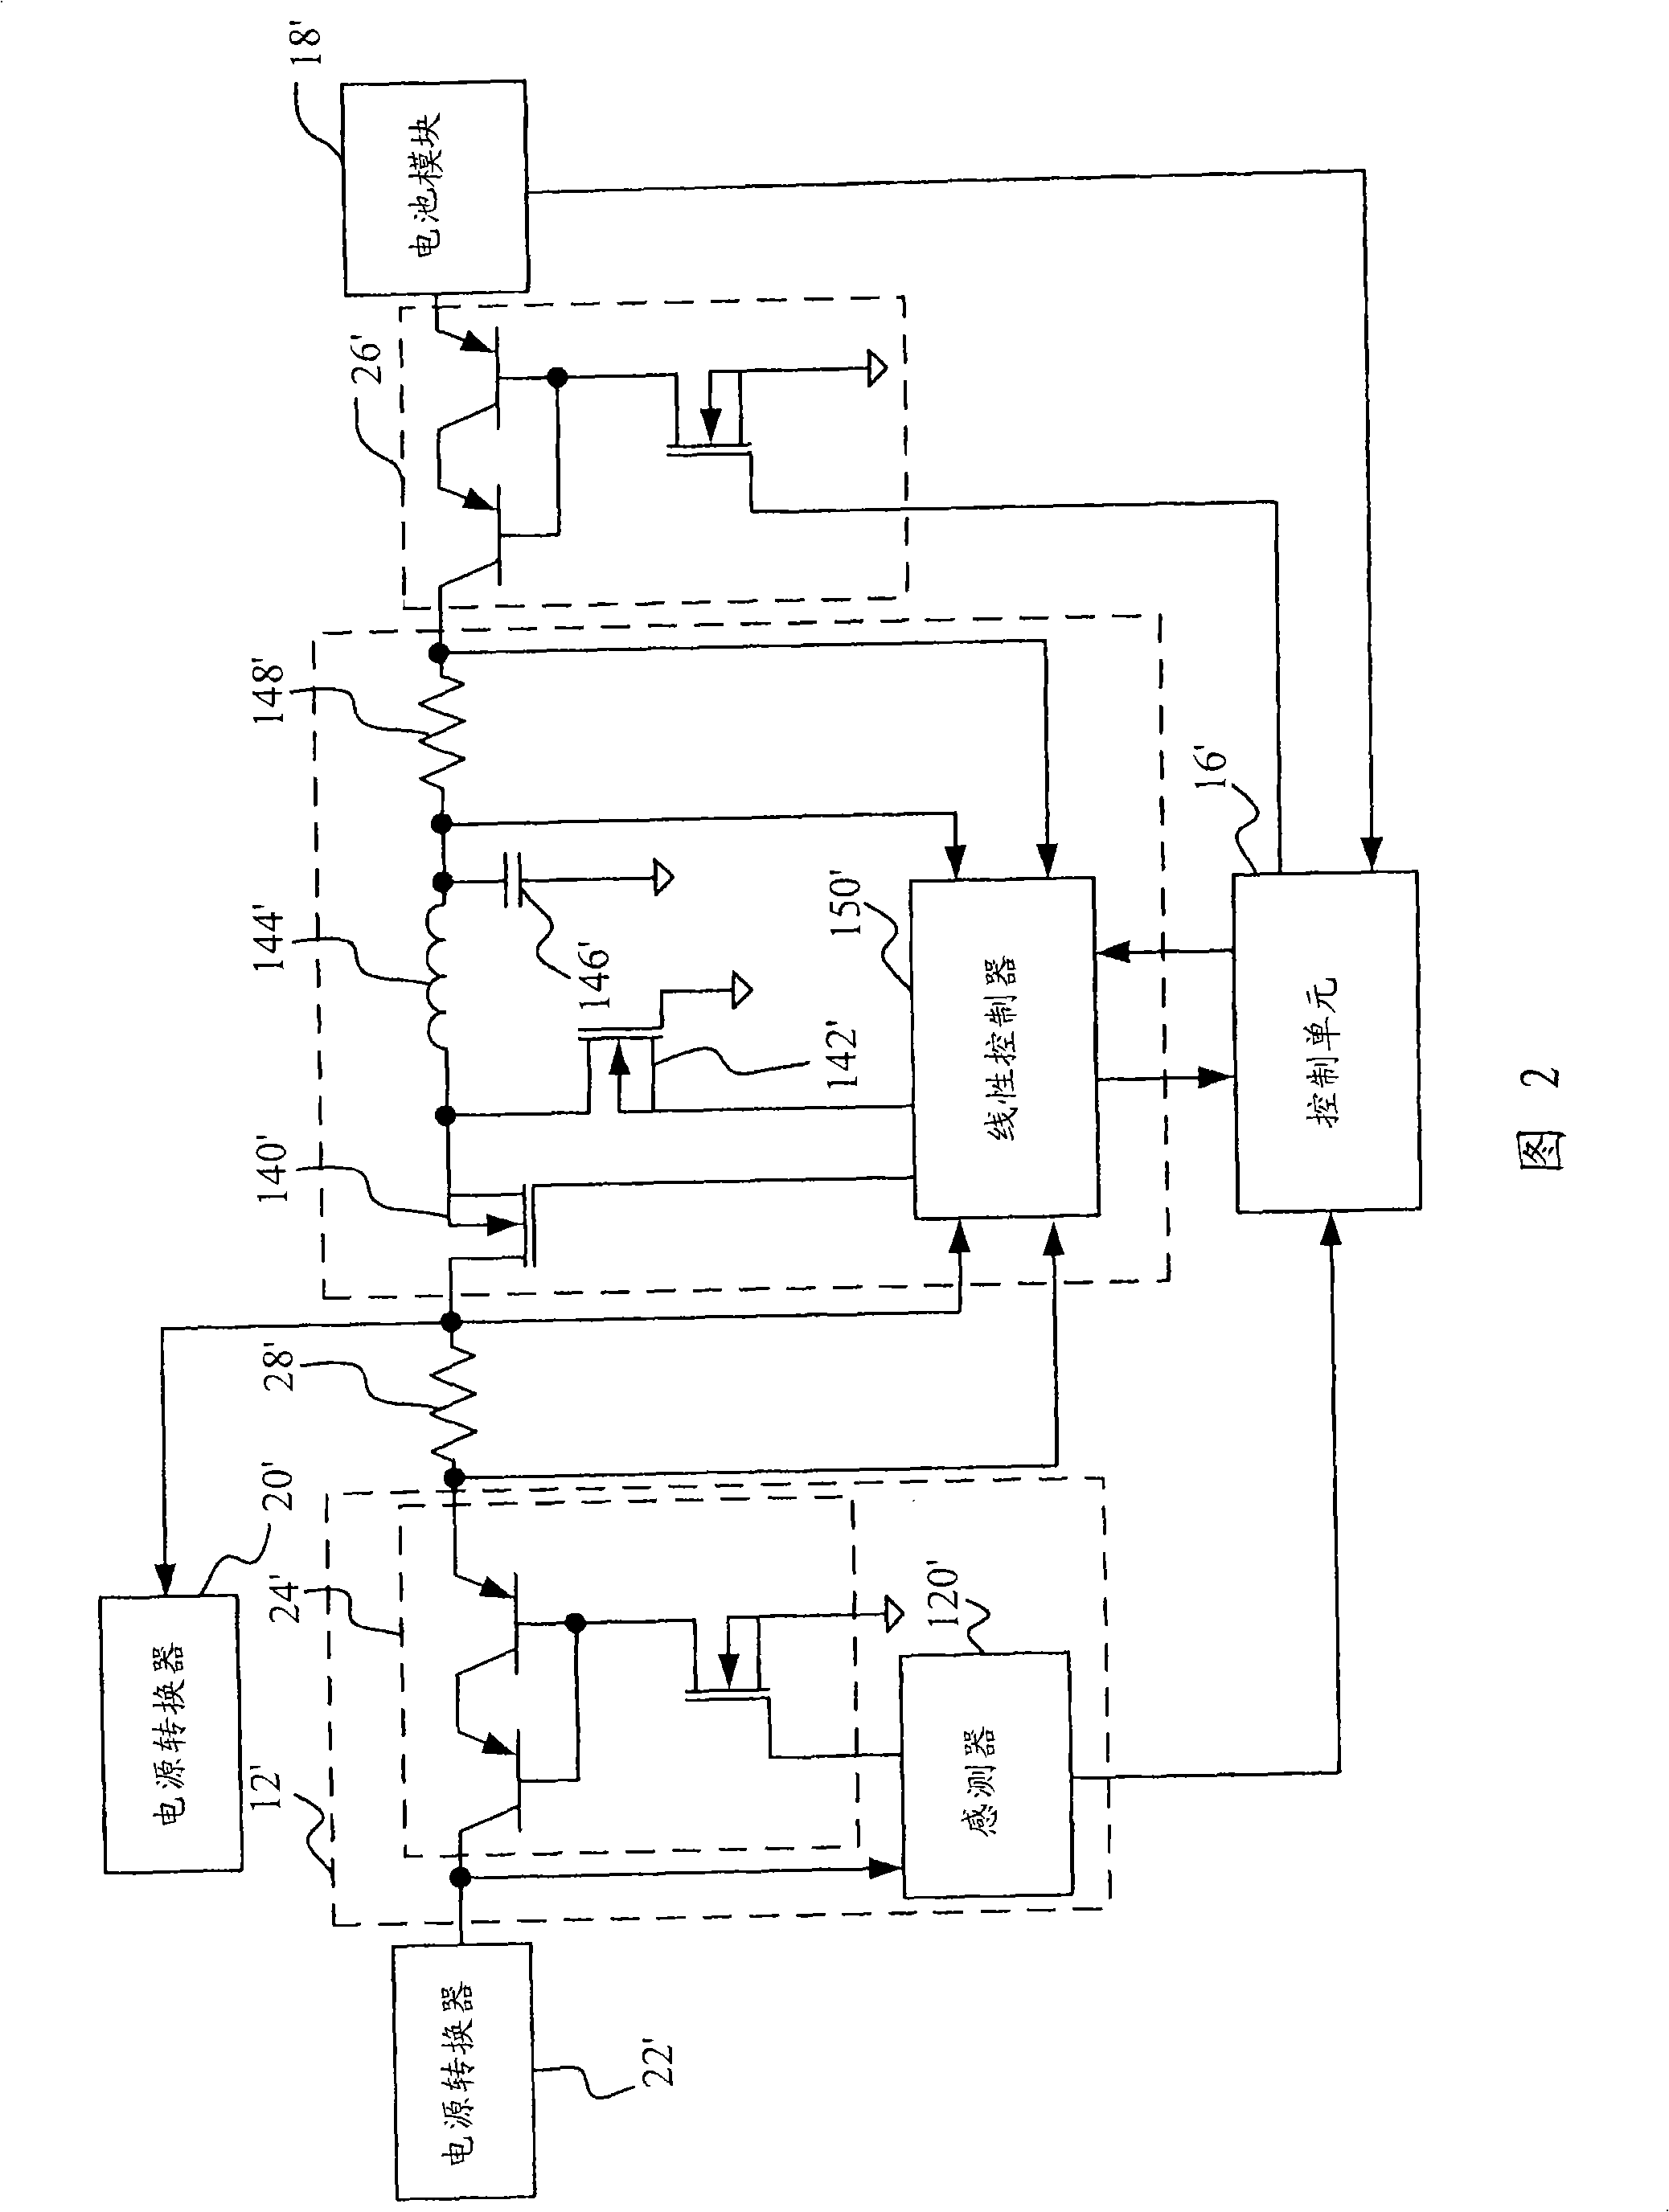 Charging equipment of portable device